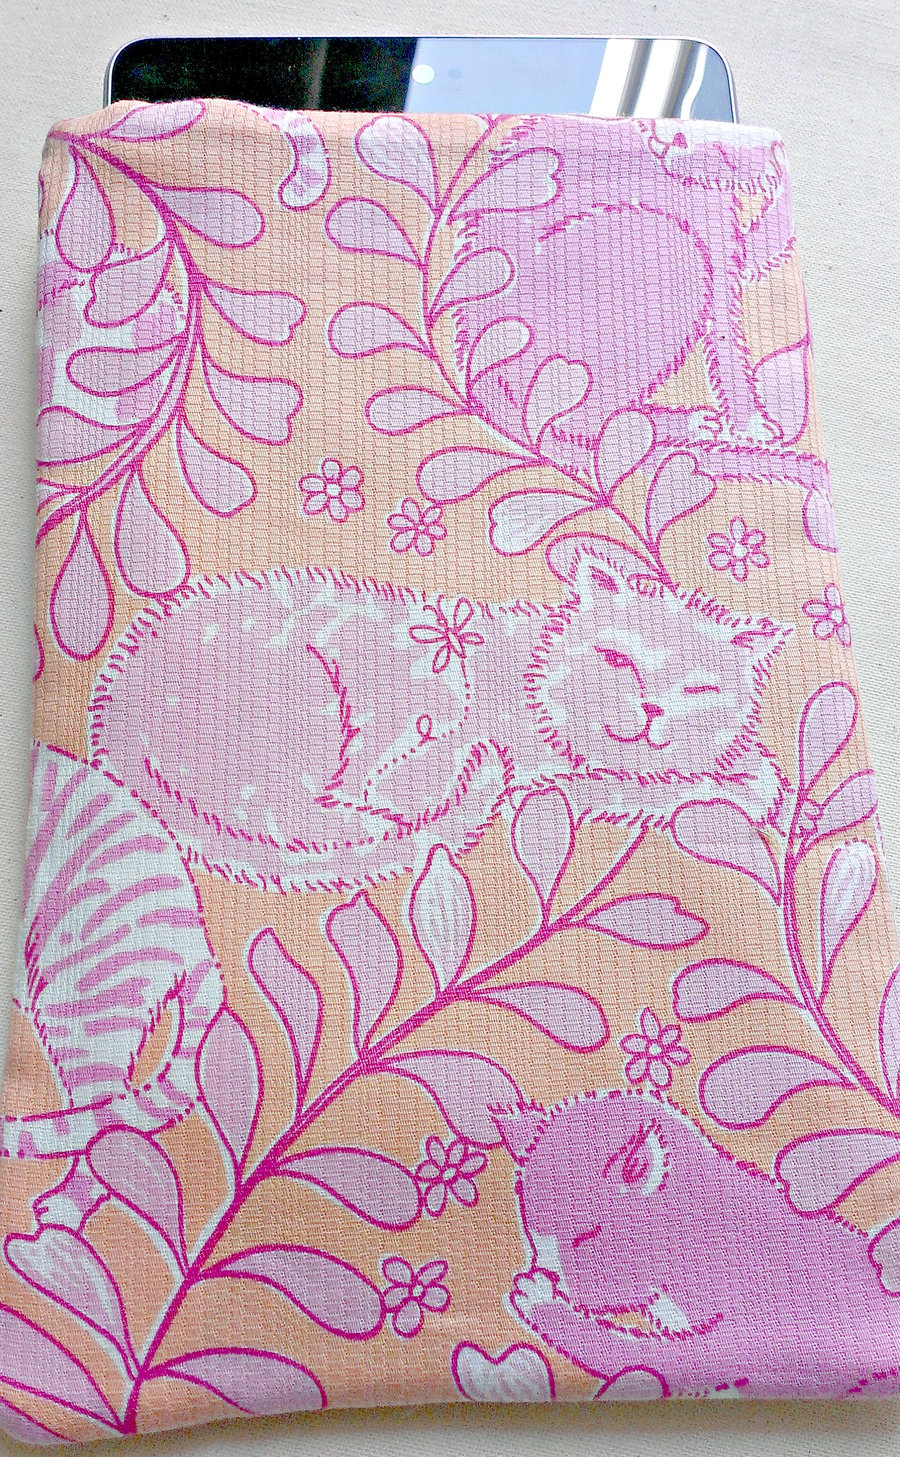 Sale - Pink Cat Tablet Sleeve For Kindle Nexus or Similar